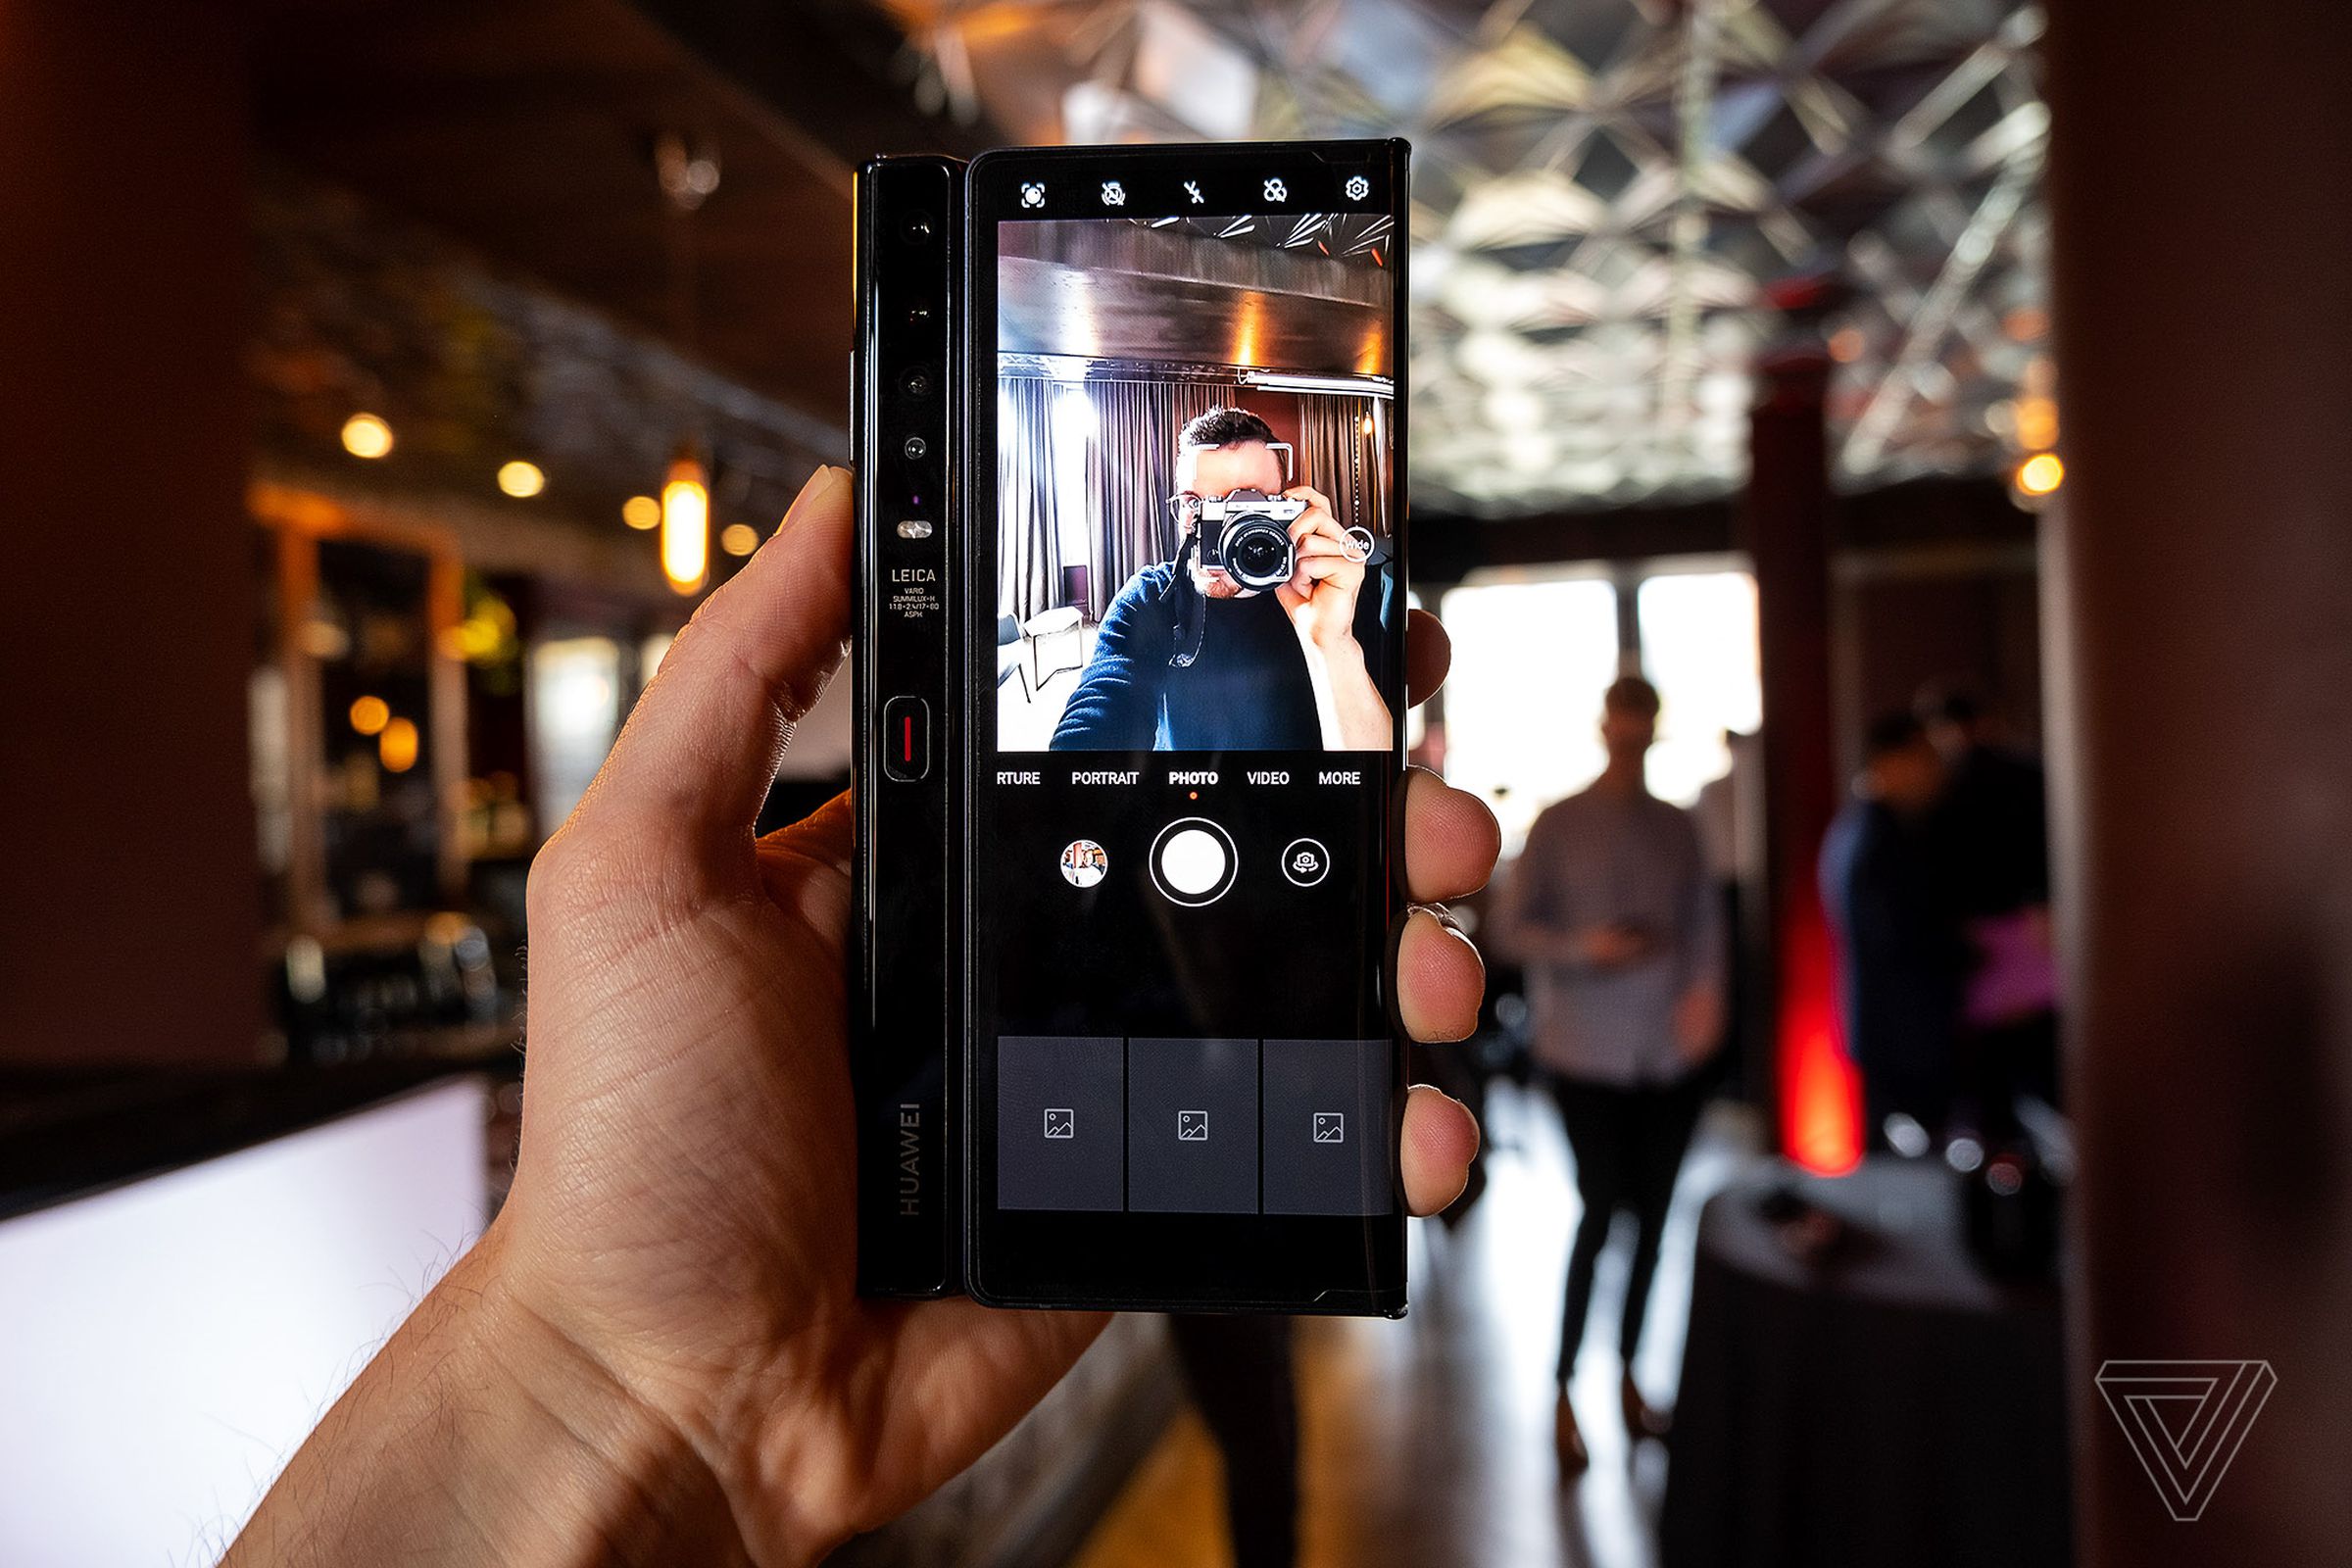 The Mate Xs has a quad-camera array on its rear that can also be used for selfies.